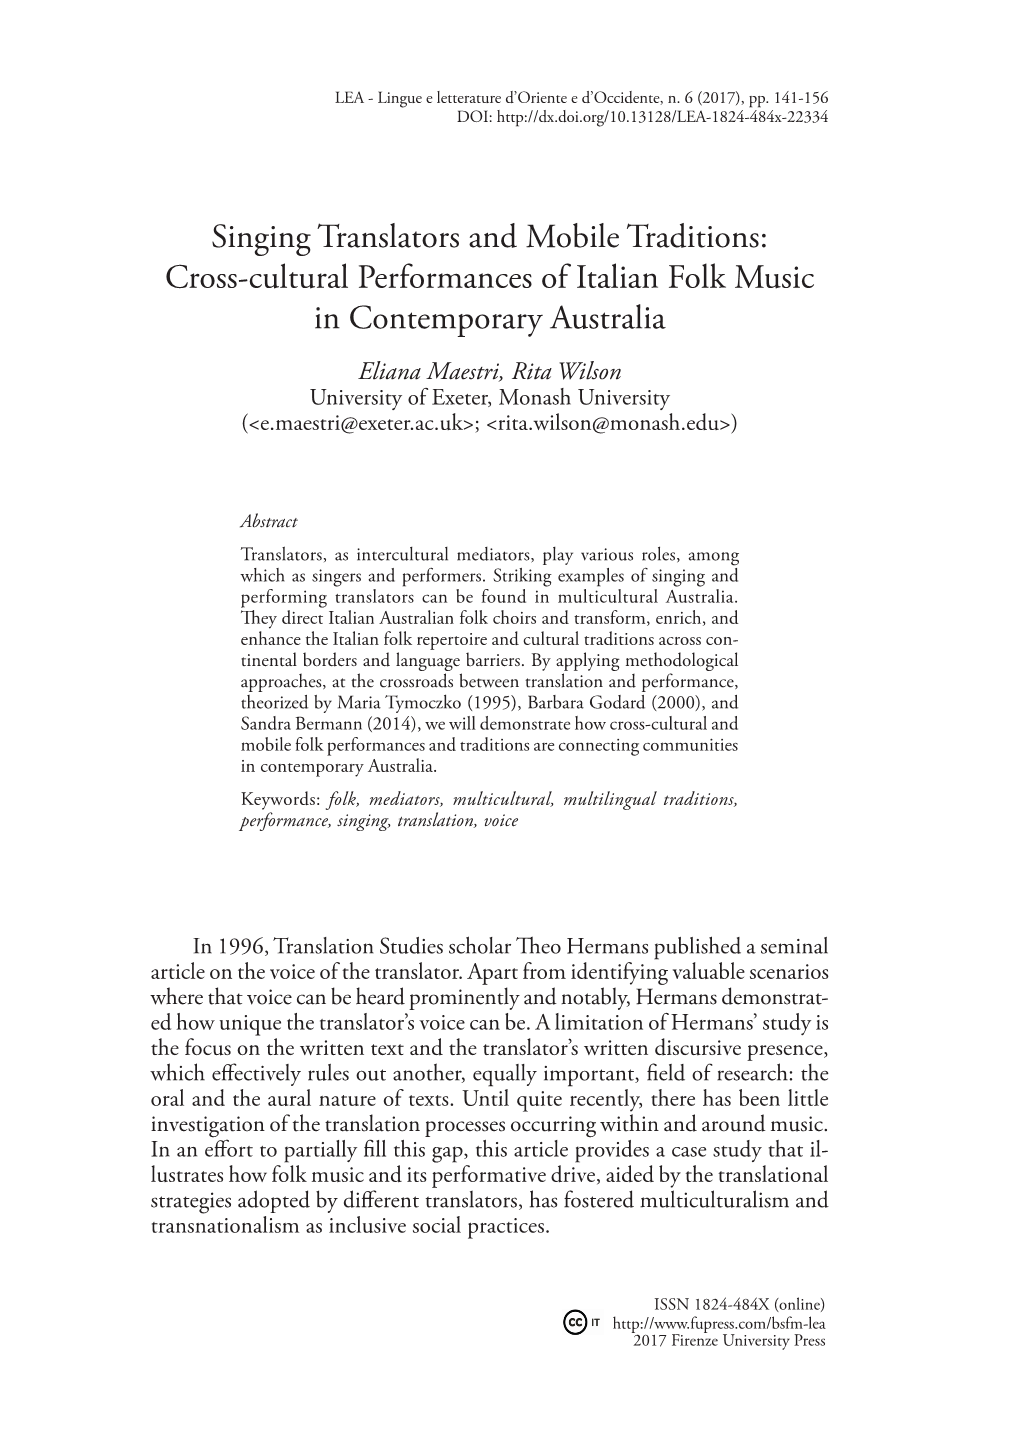 Singing Translators and Mobile Traditions: Cross-Cultural